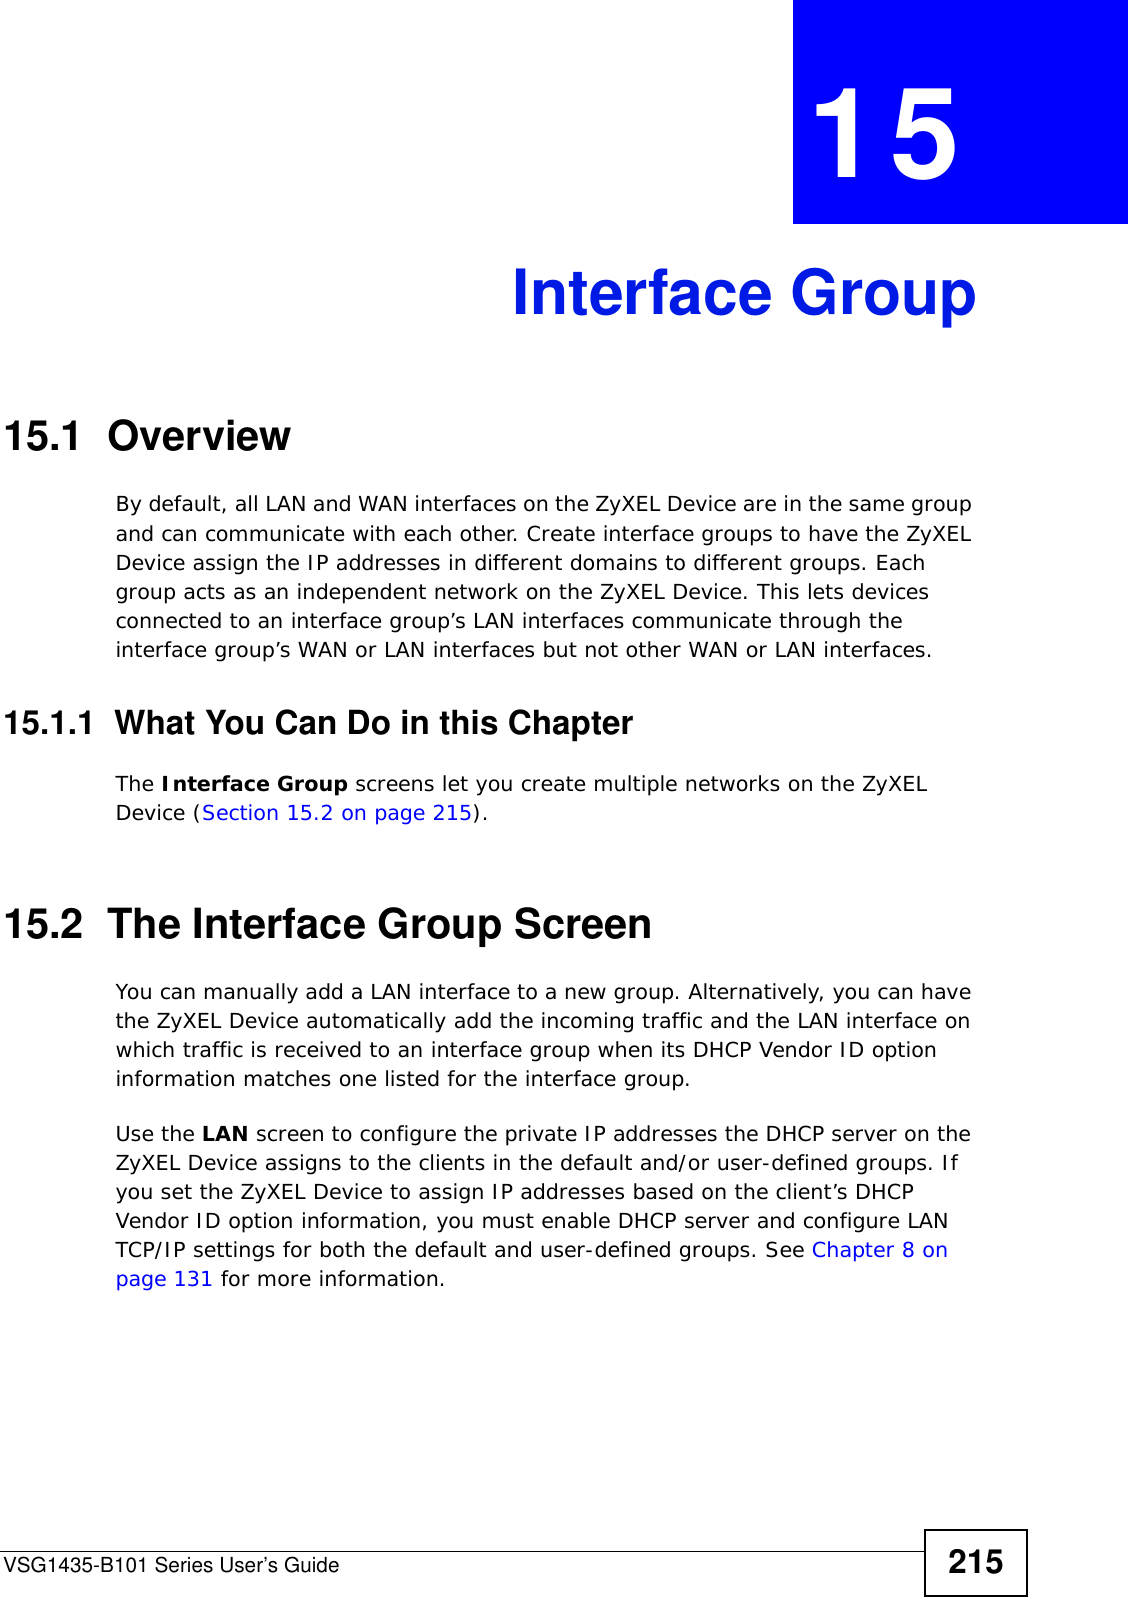 VSG1435-B101 Series User’s Guide 215CHAPTER  15 Interface Group15.1  OverviewBy default, all LAN and WAN interfaces on the ZyXEL Device are in the same group and can communicate with each other. Create interface groups to have the ZyXEL Device assign the IP addresses in different domains to different groups. Each group acts as an independent network on the ZyXEL Device. This lets devices connected to an interface group’s LAN interfaces communicate through the interface group’s WAN or LAN interfaces but not other WAN or LAN interfaces.15.1.1  What You Can Do in this ChapterThe Interface Group screens let you create multiple networks on the ZyXEL Device (Section 15.2 on page 215).15.2  The Interface Group ScreenYou can manually add a LAN interface to a new group. Alternatively, you can have the ZyXEL Device automatically add the incoming traffic and the LAN interface on which traffic is received to an interface group when its DHCP Vendor ID option information matches one listed for the interface group. Use the LAN screen to configure the private IP addresses the DHCP server on the ZyXEL Device assigns to the clients in the default and/or user-defined groups. If you set the ZyXEL Device to assign IP addresses based on the client’s DHCP Vendor ID option information, you must enable DHCP server and configure LAN TCP/IP settings for both the default and user-defined groups. See Chapter 8 on page 131 for more information.